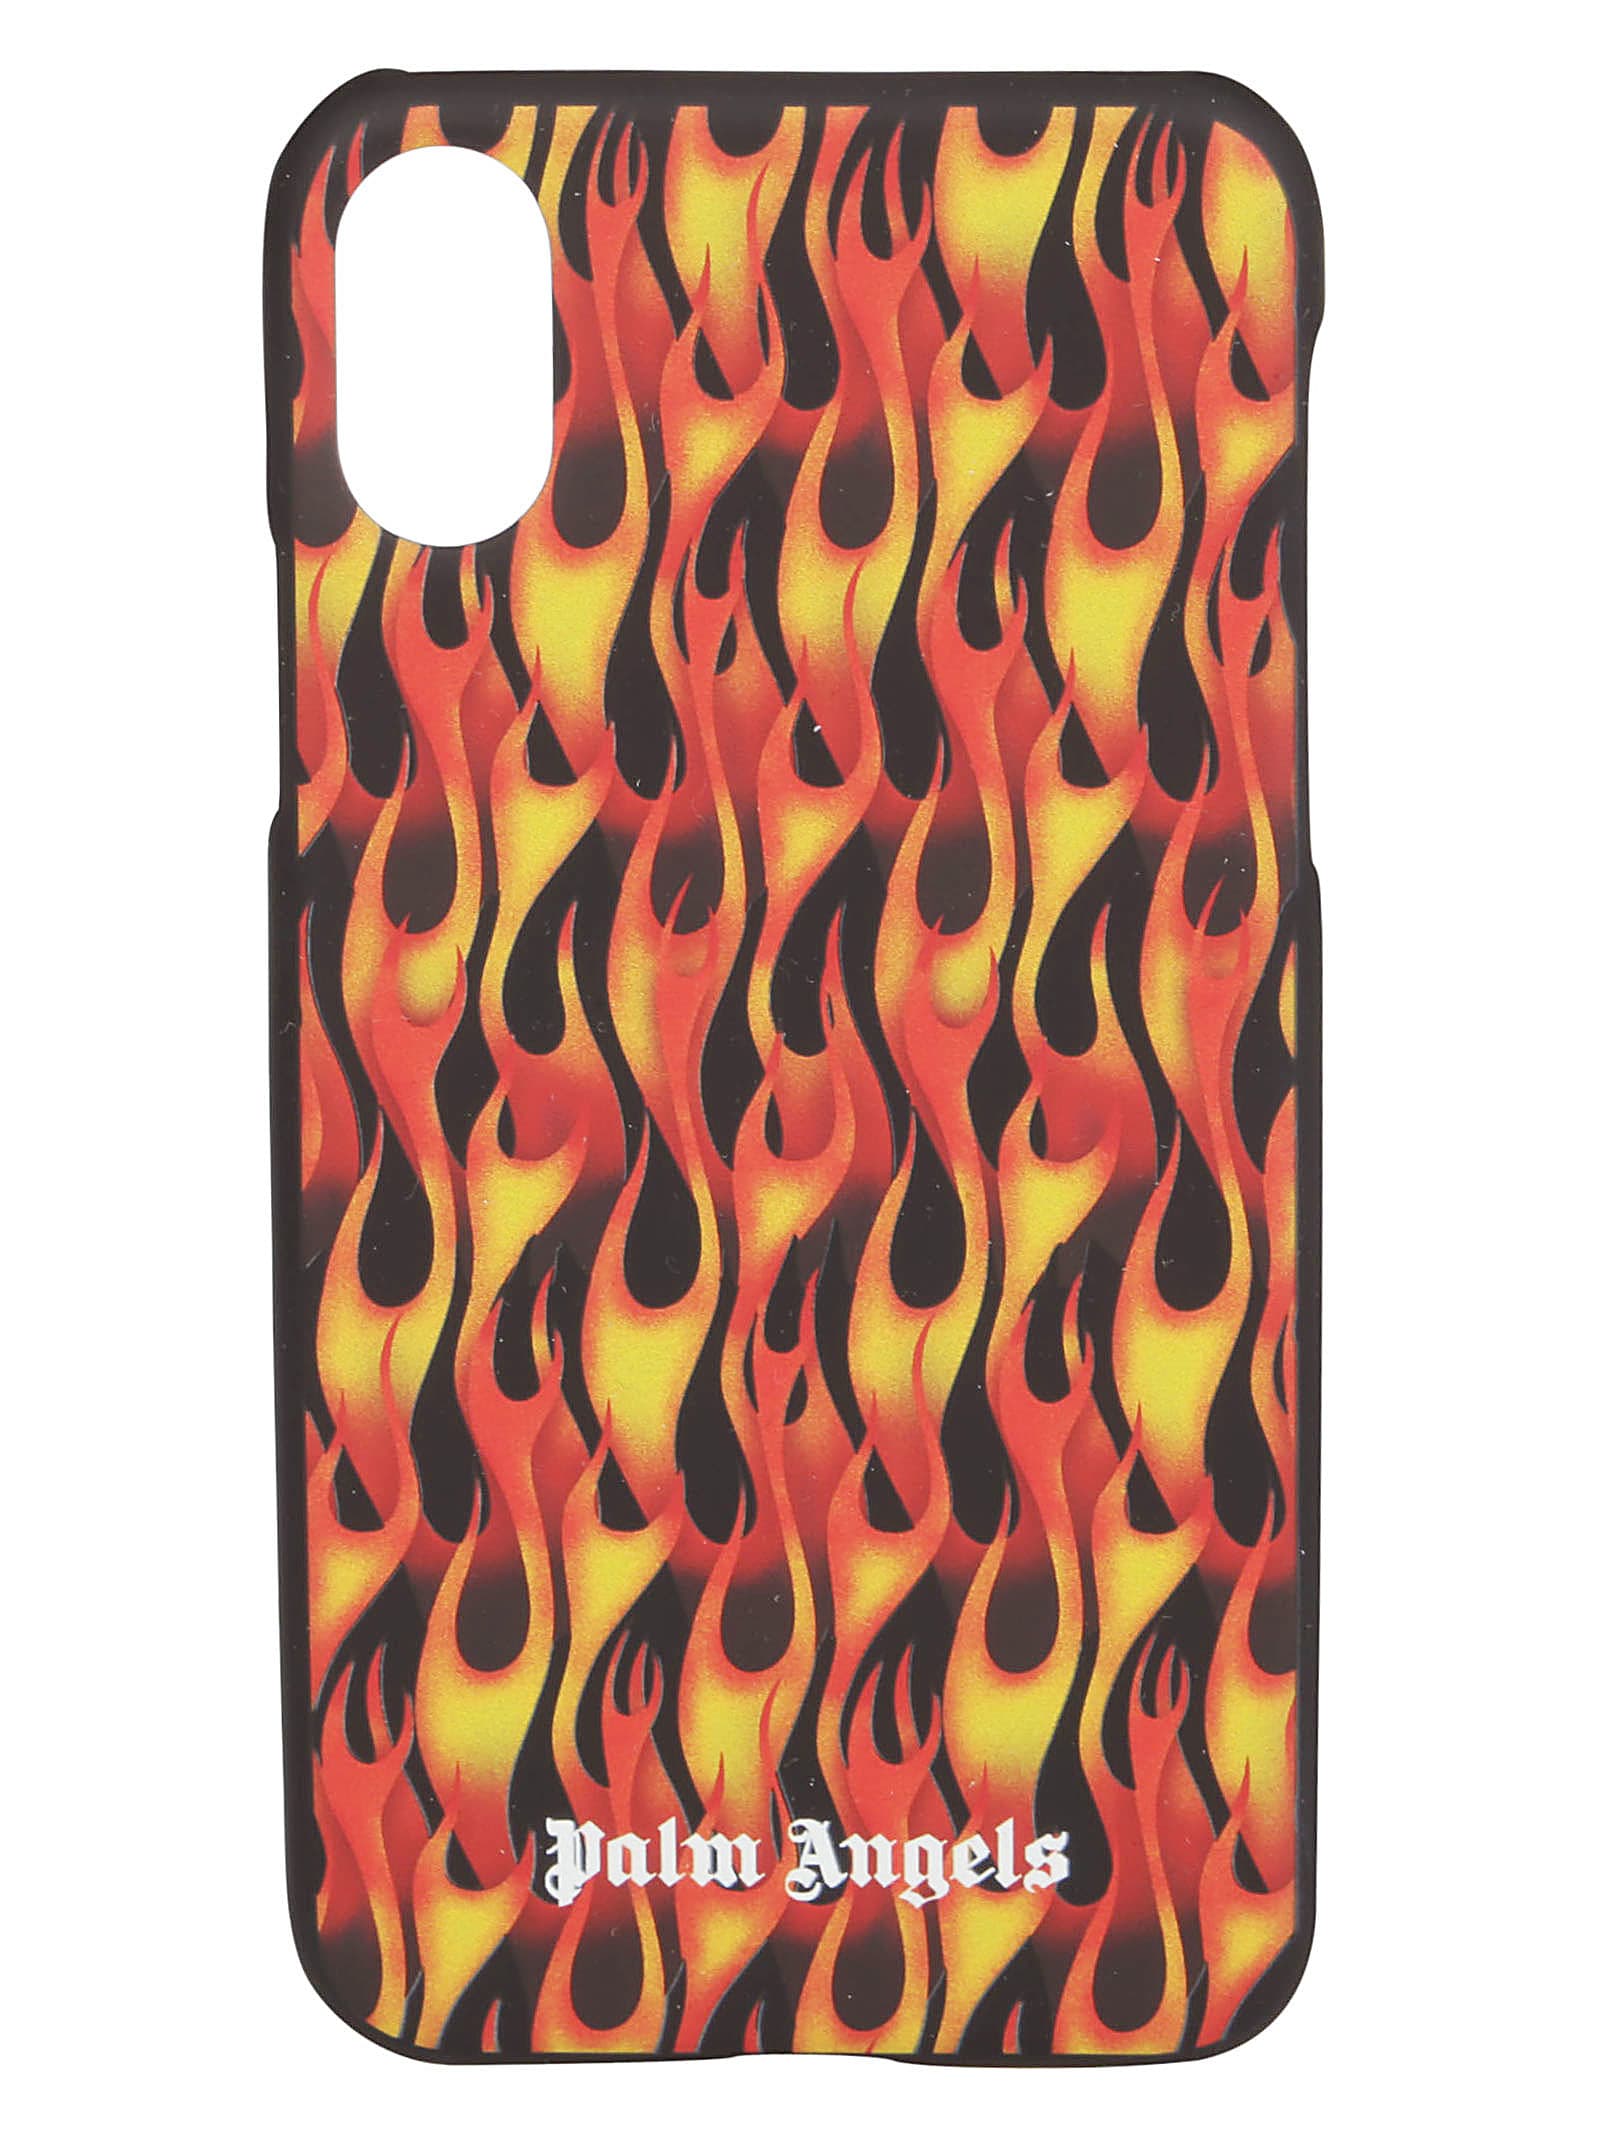 PALM ANGELS FLAME IPHONE CASE,11218684